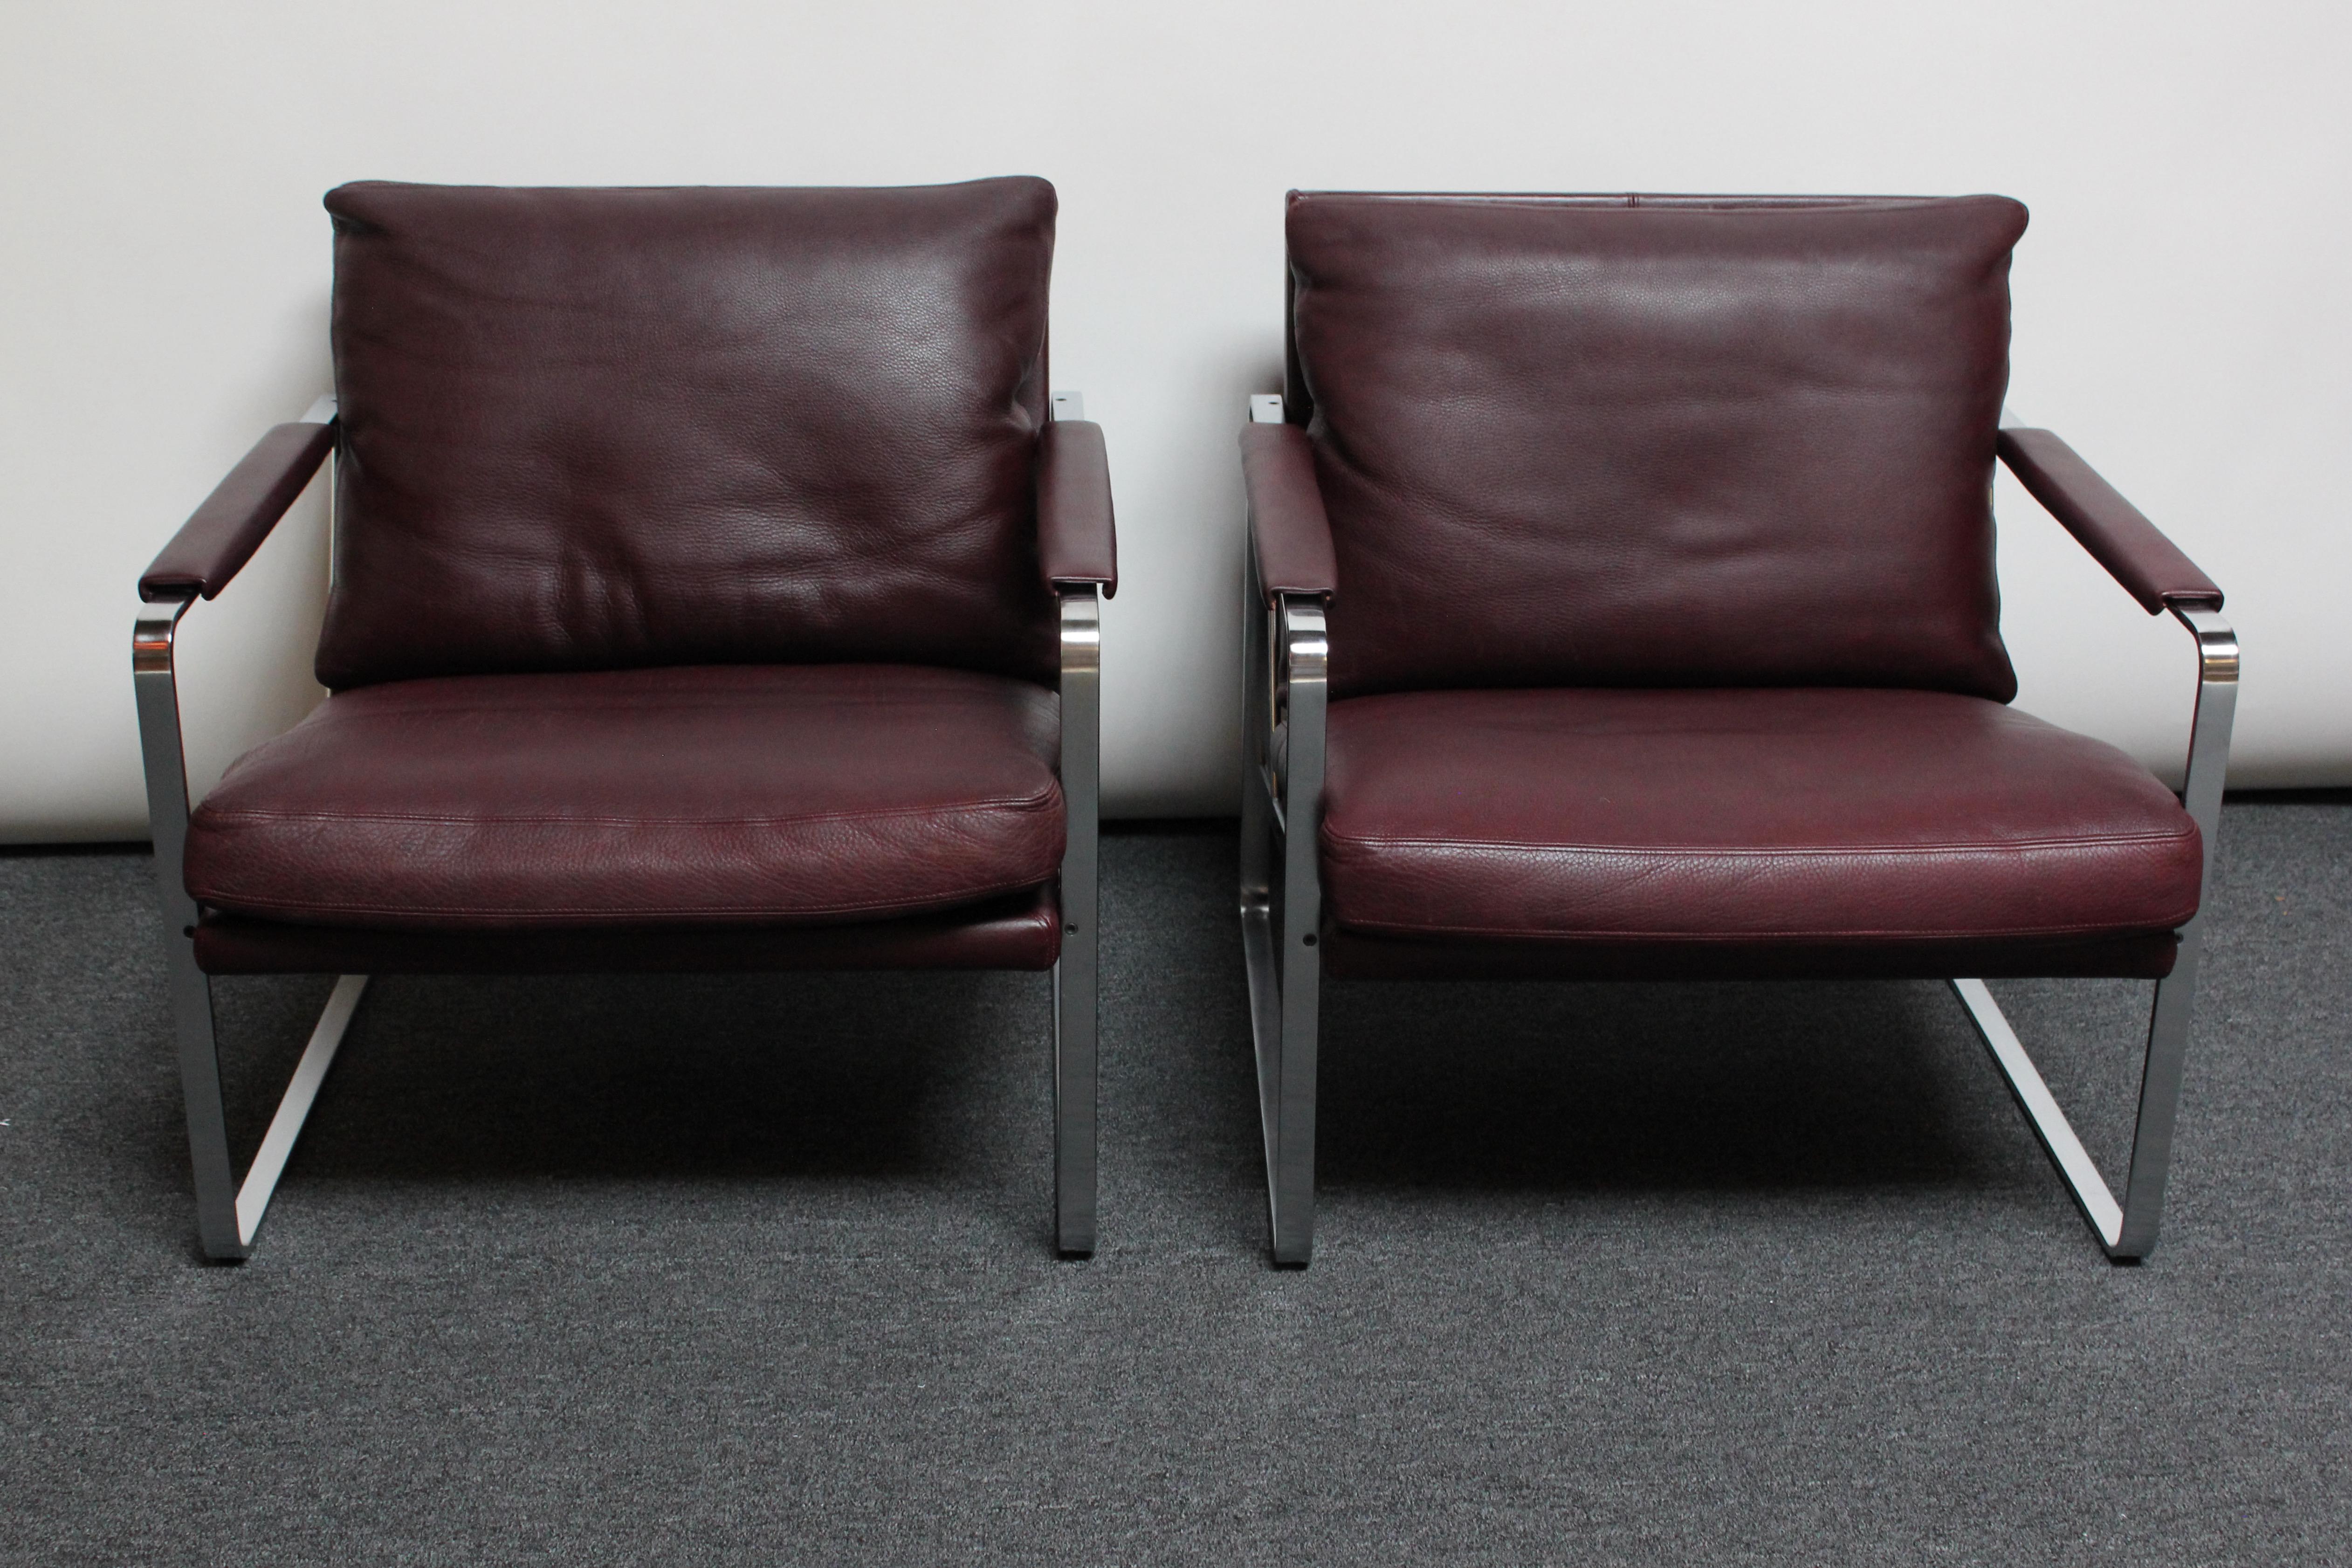 Pair of Preben Fabricius for Walter Knoll Cordovan Leather Lounge Chairs In Good Condition For Sale In Brooklyn, NY